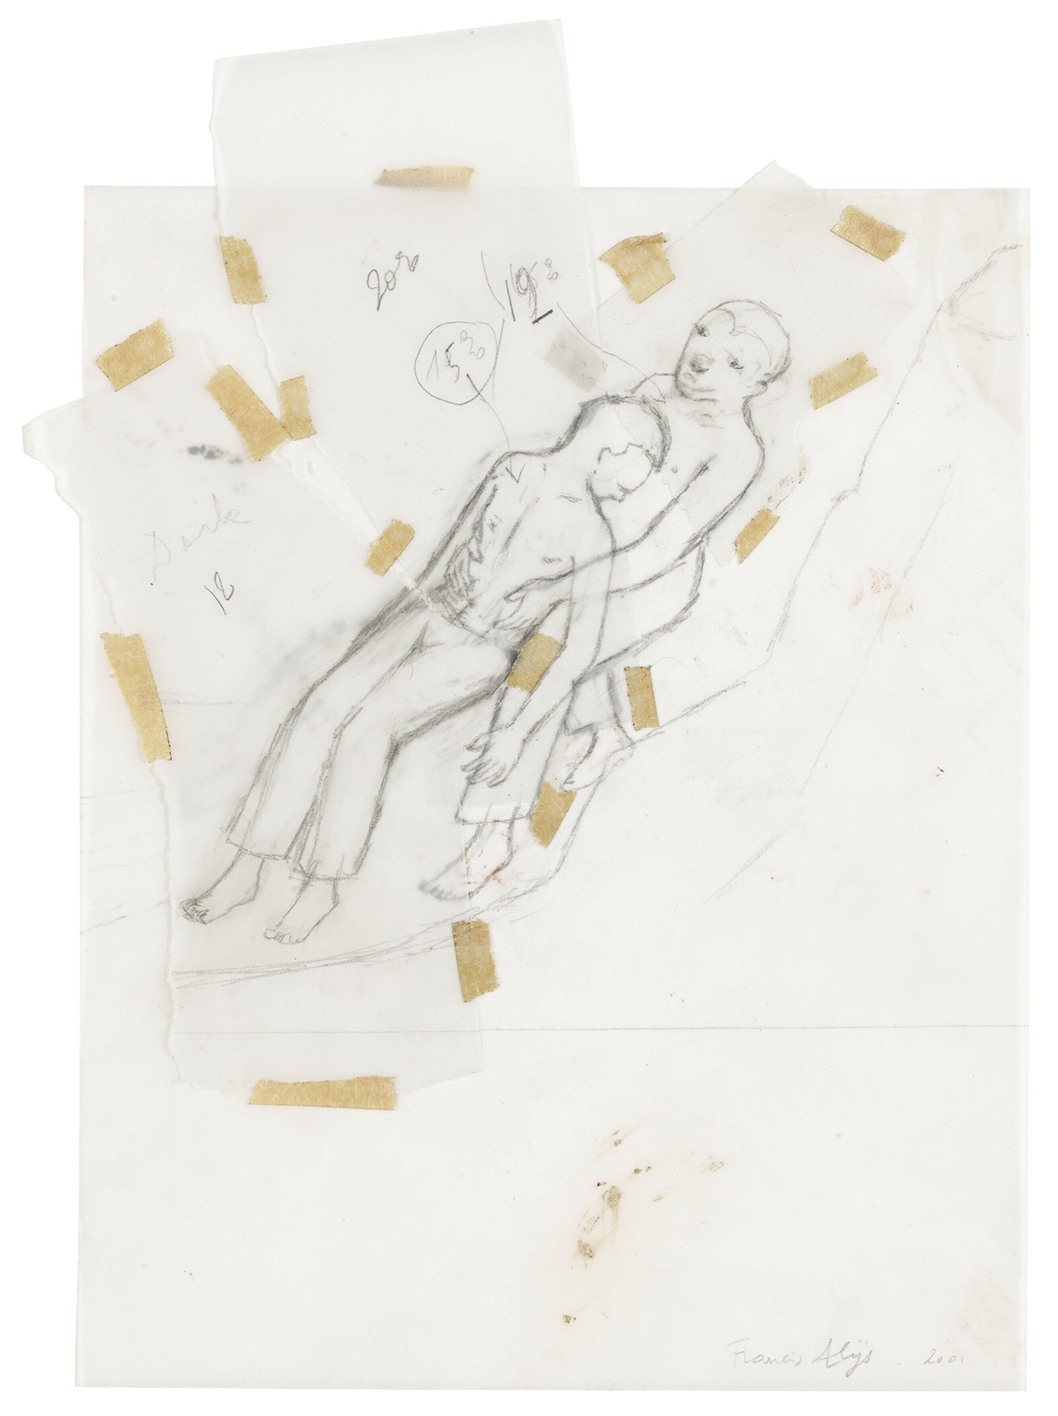 Francis Alÿs | Untitled, 2001 | graphite and adhesive tape on tracing paper collage